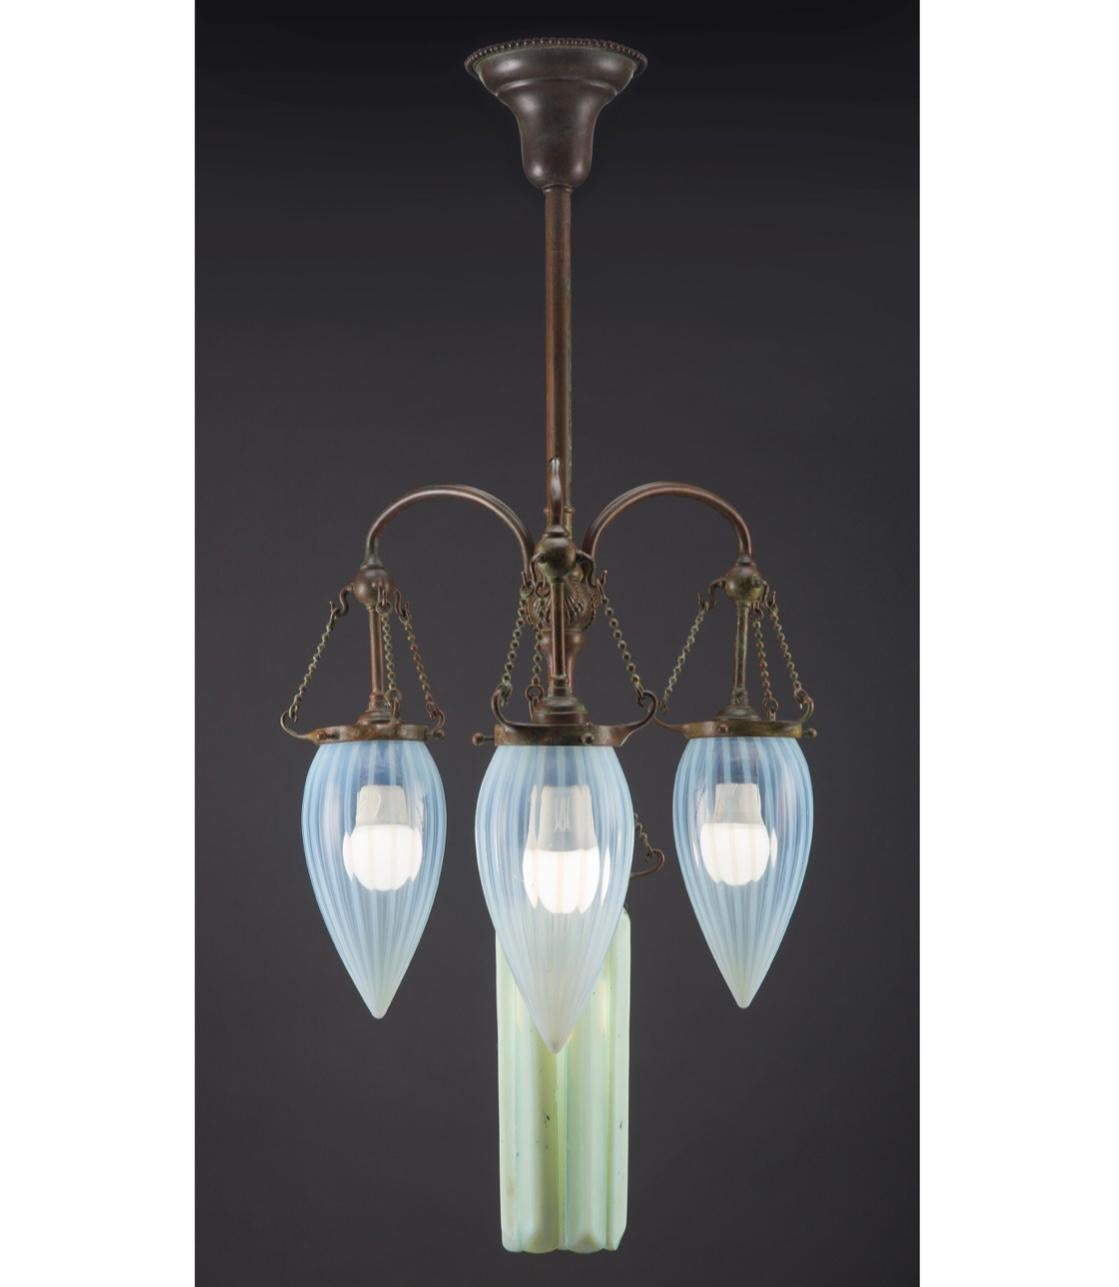 Tiffany Studios Favrile glass and patinated bronze Moorish lamp, circa 1900
In absolutely excellent condition; this chandelier will make and room it lights up. It is much larger that the photos depict. At almost 33 inches tall; the prisms are 10